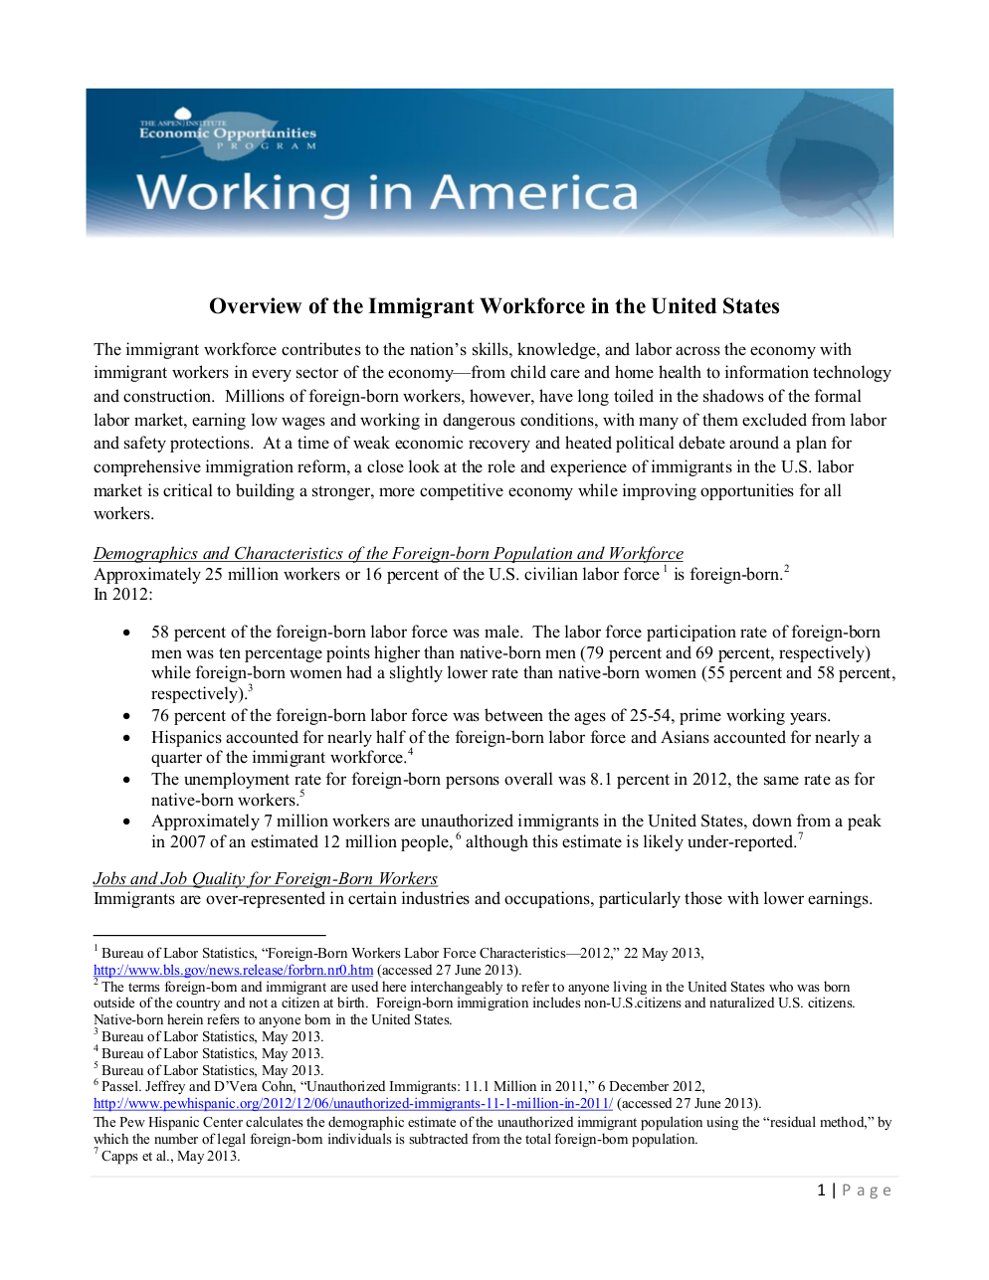 Fact Sheet on Foreign-Born Workforce